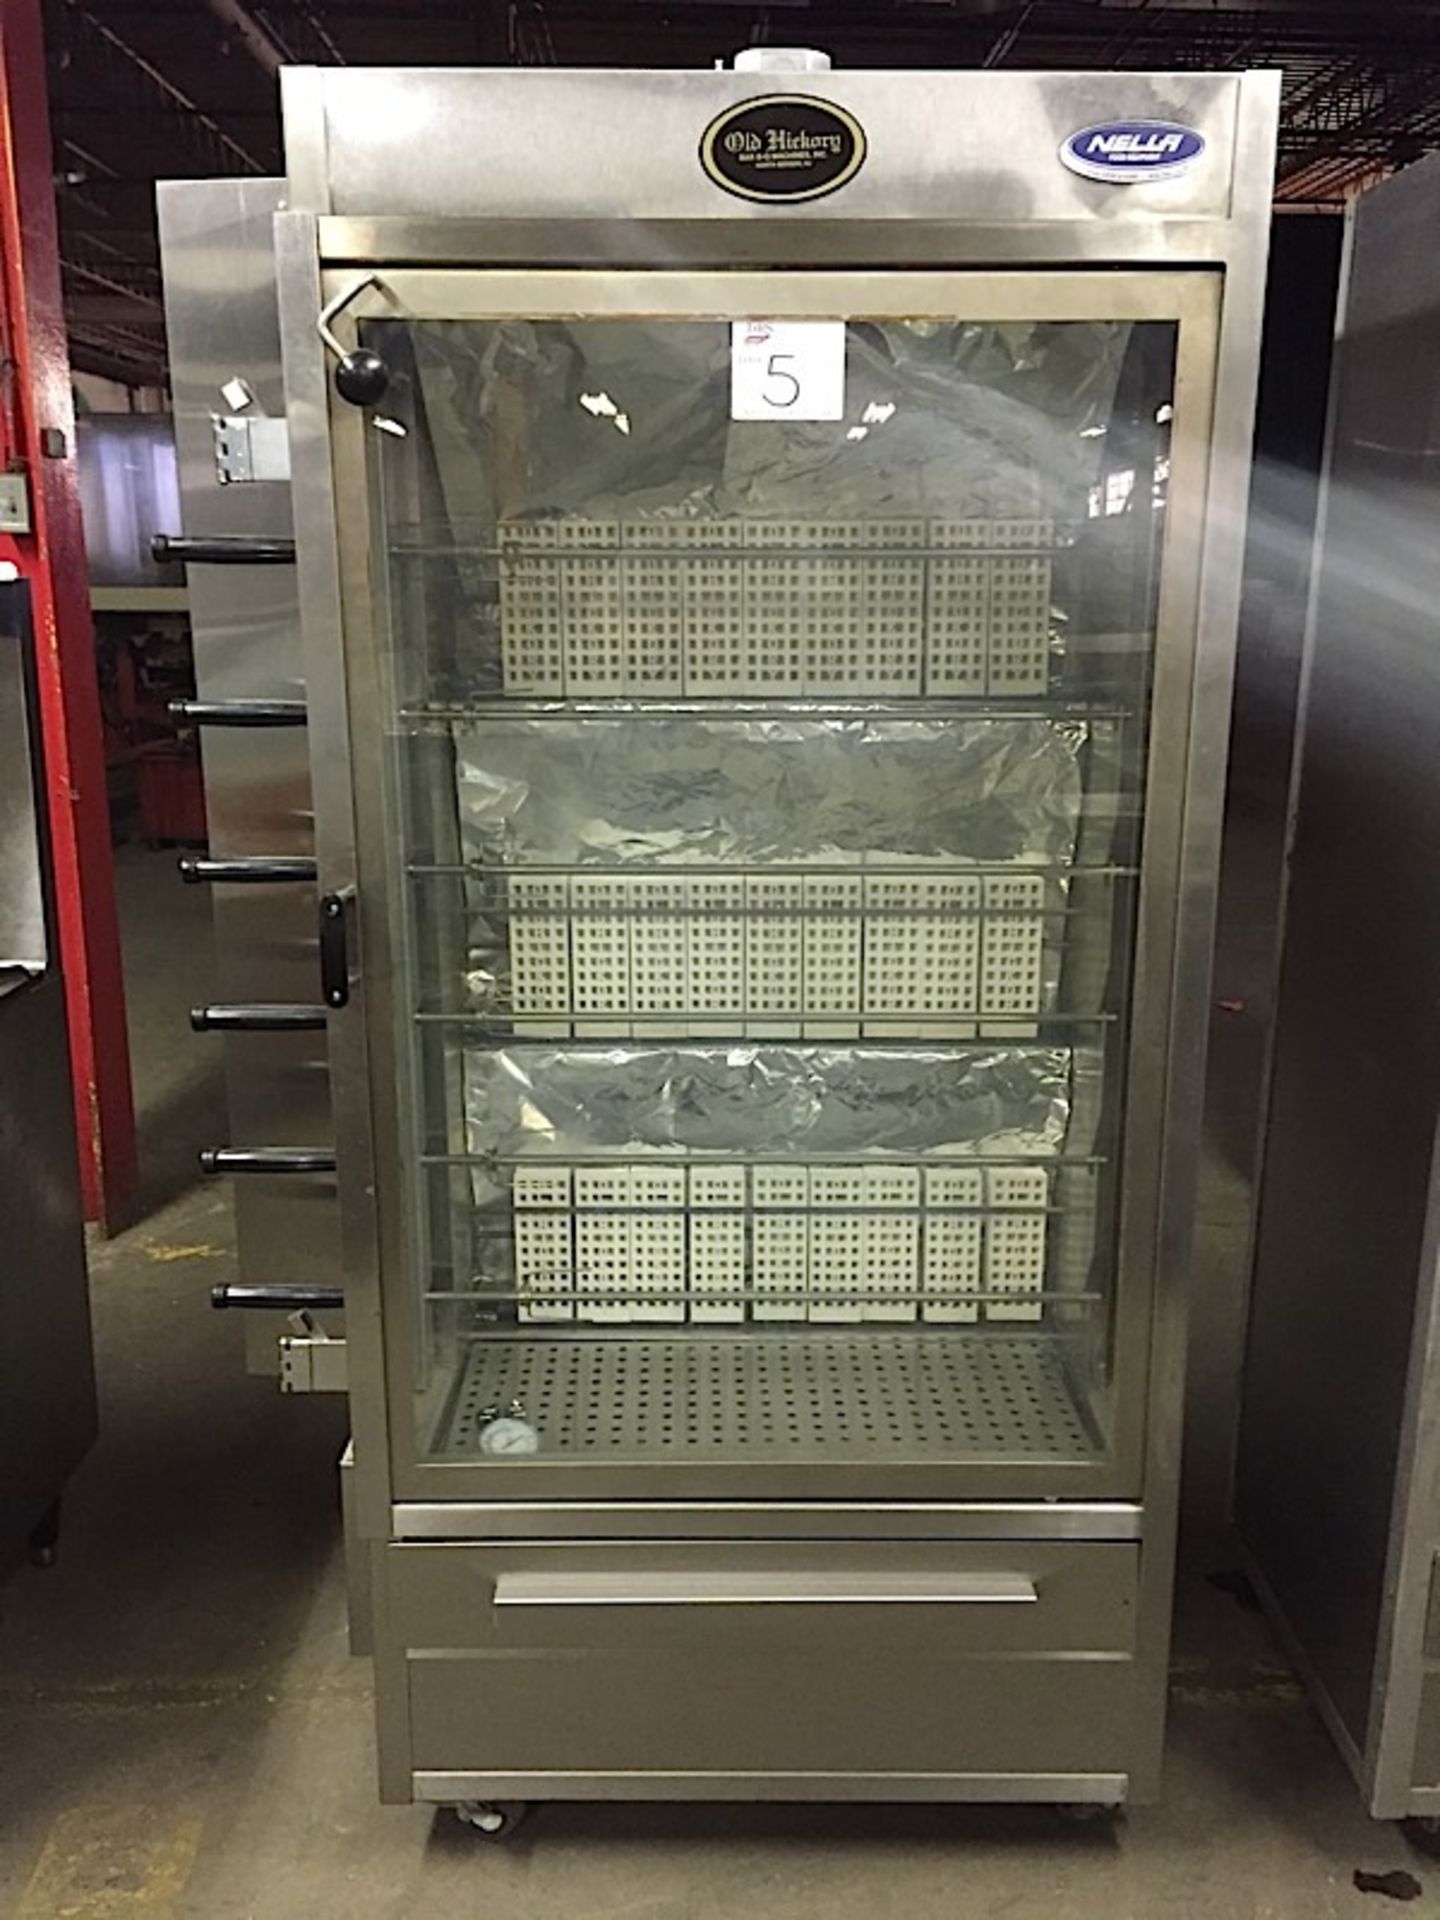 OLD HICKORY (N/7GPLH) ROTISSERIE OVEN